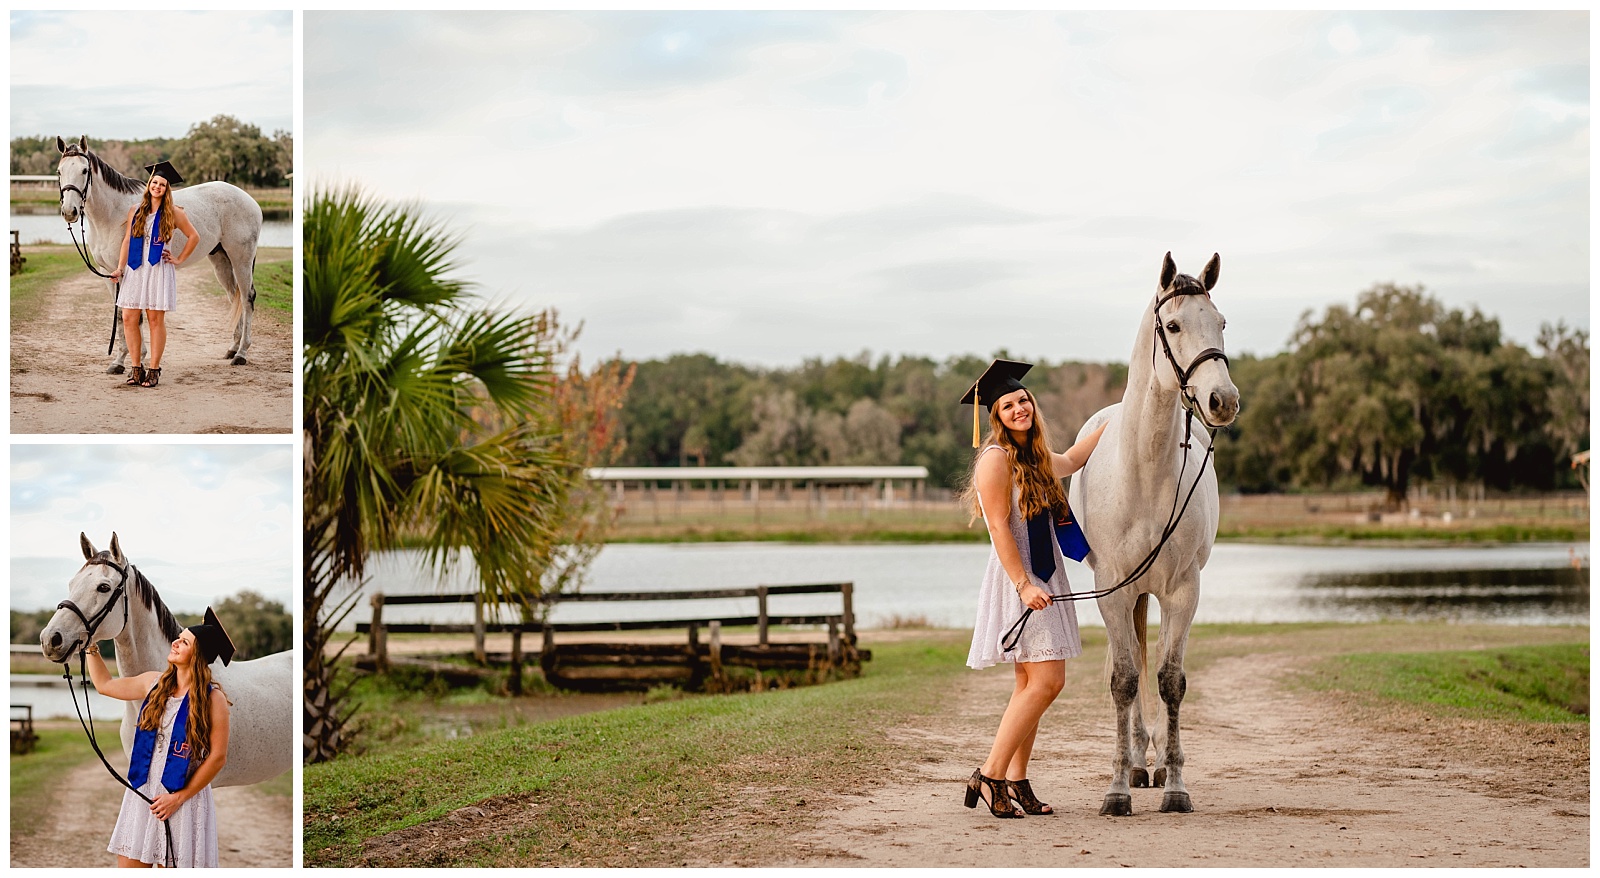 University of Florida graduation pictures with horse at the Horse Teaching Unit on campus.